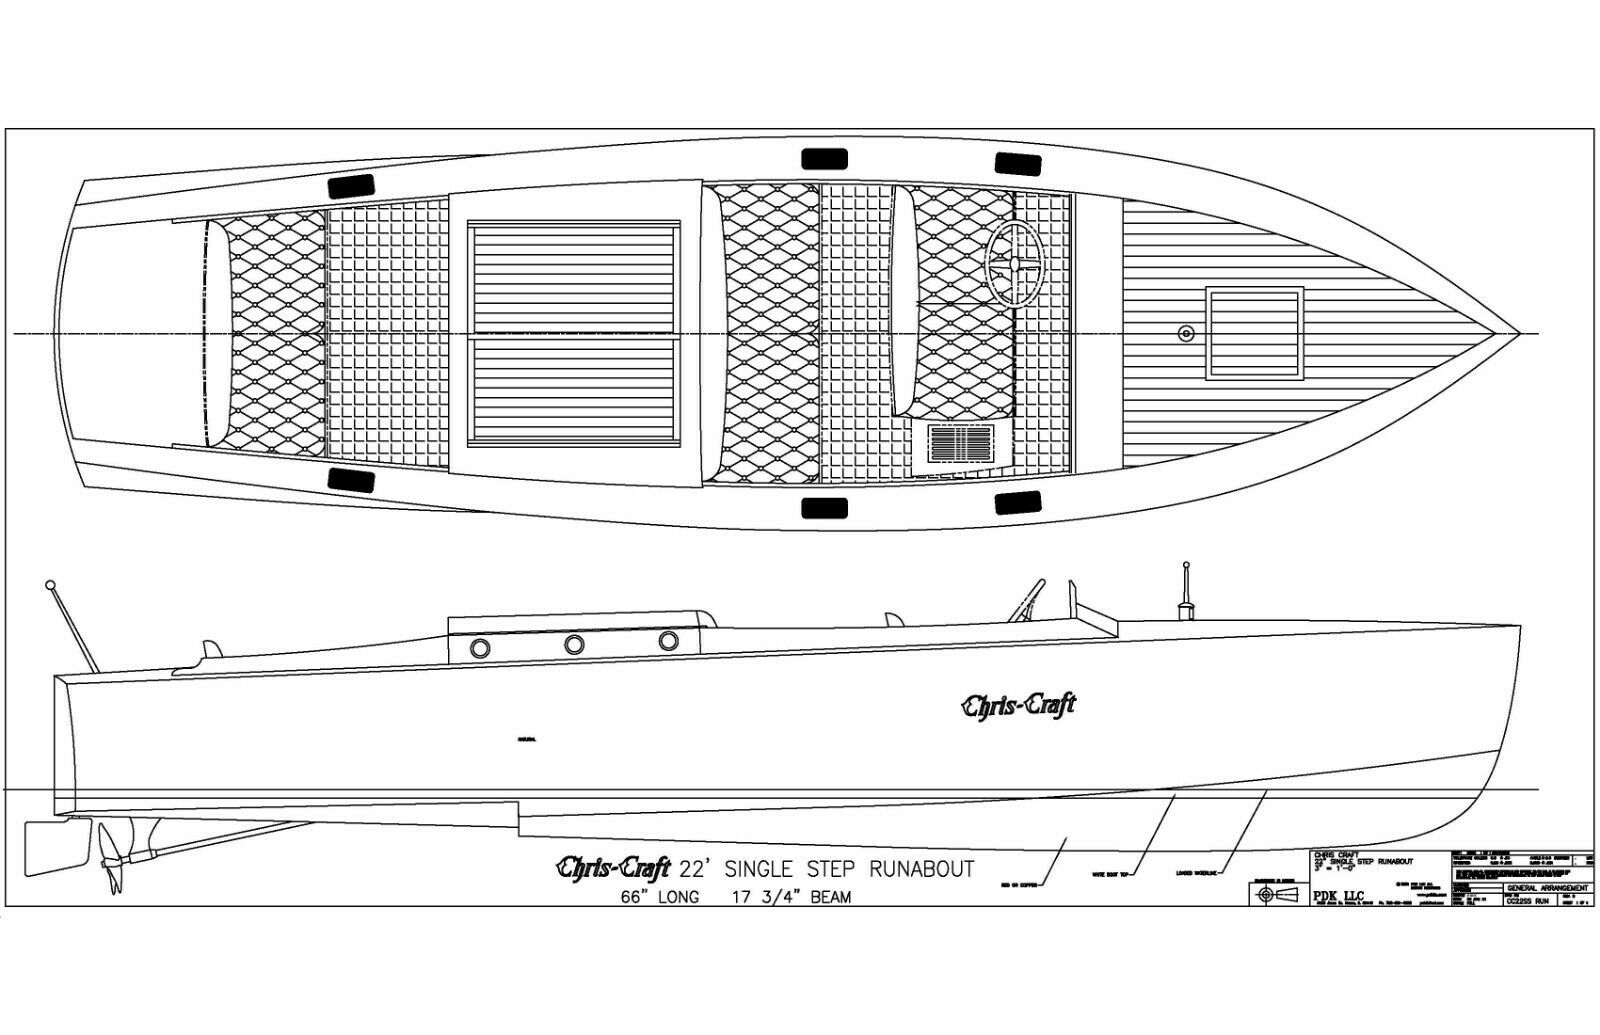 Chris Craft 22’ Single Step Runabout Cad Plan Files Free Shipping